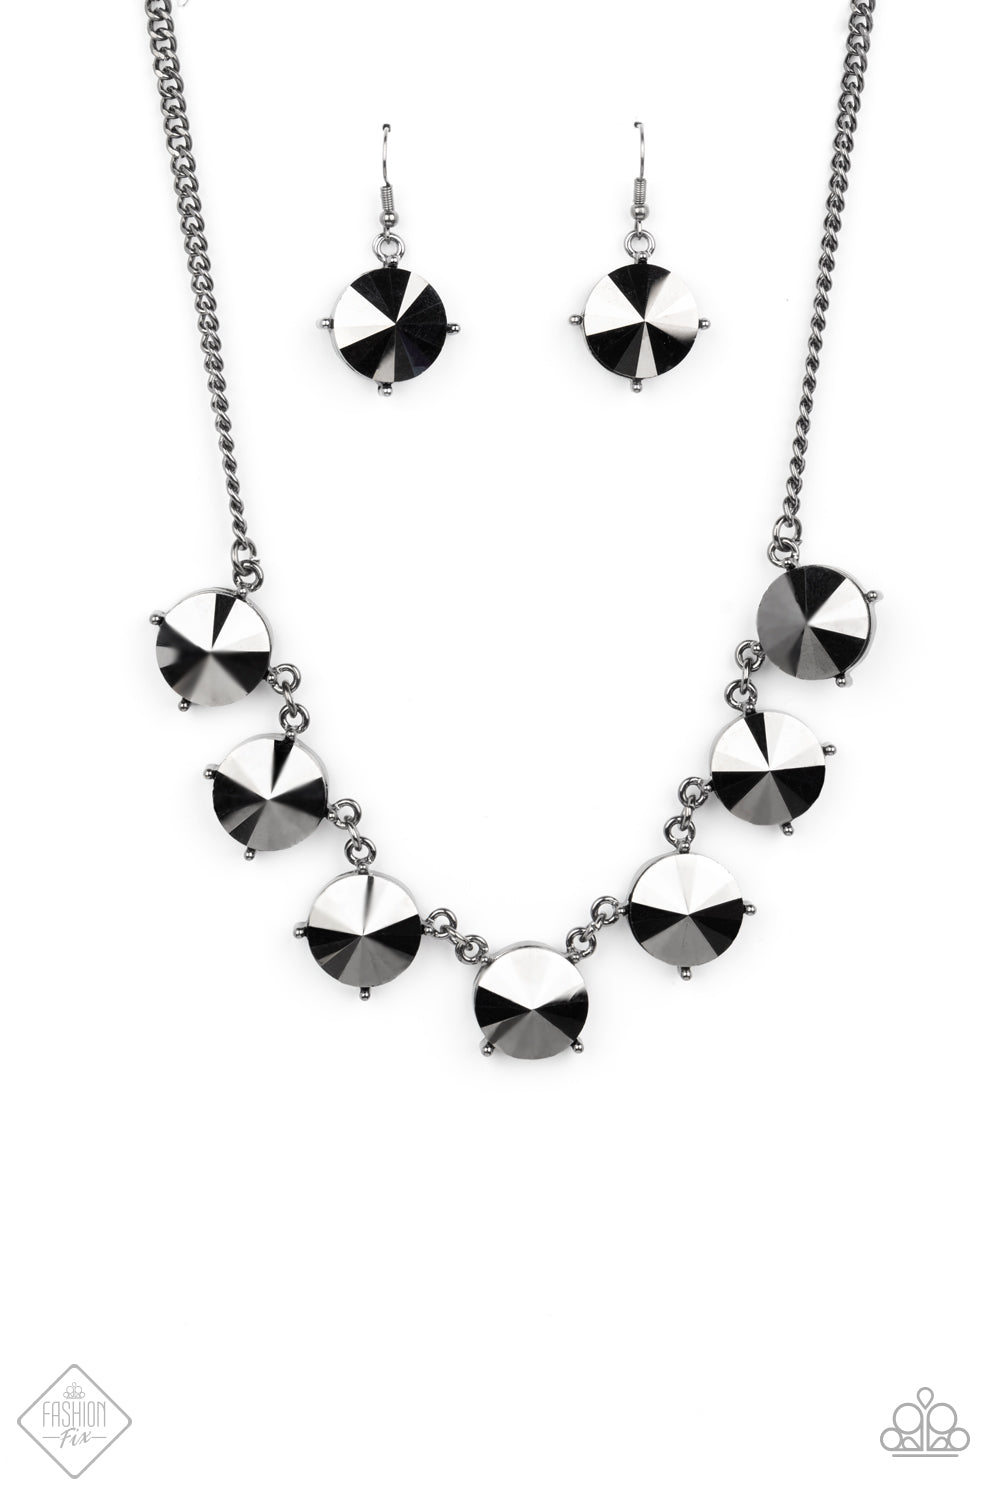 The SHOWCASE Must Go On Black Necklace - Paparazzi Accessories  Attached to glistening gunmetal chains, a dramatic collection of oversized hematite rhinestones boldly links into a smoldering statement piece below the collar. Features an adjustable clasp closure.  All Paparazzi Accessories are lead free and nickel free!  Sold as one individual necklace. Includes one pair of matching earrings.